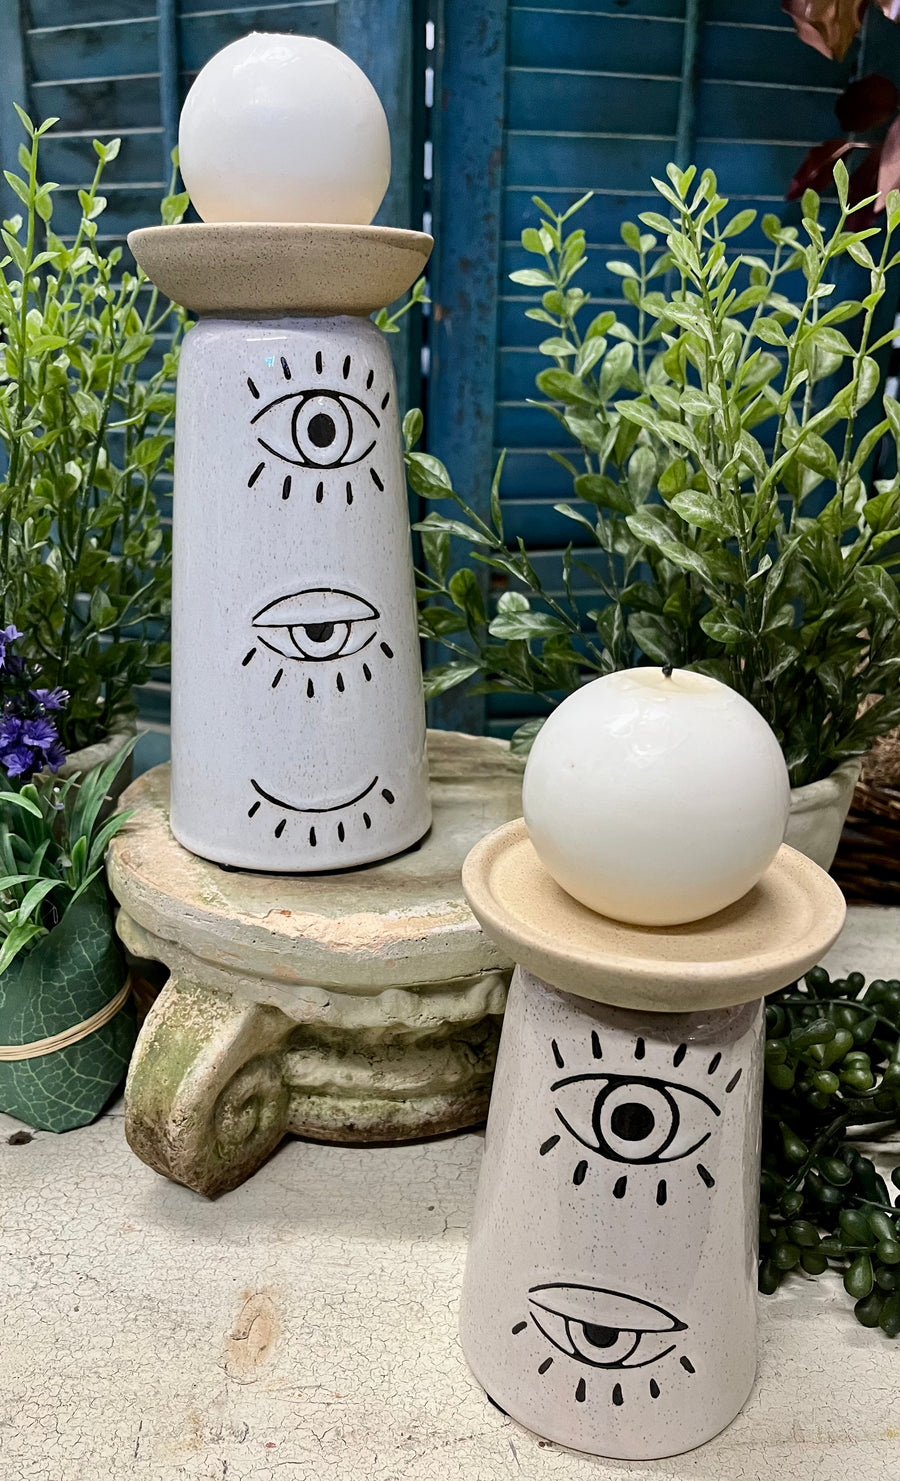 CERAMIC CANDLE HOLDERS WITH EYES DETAIL